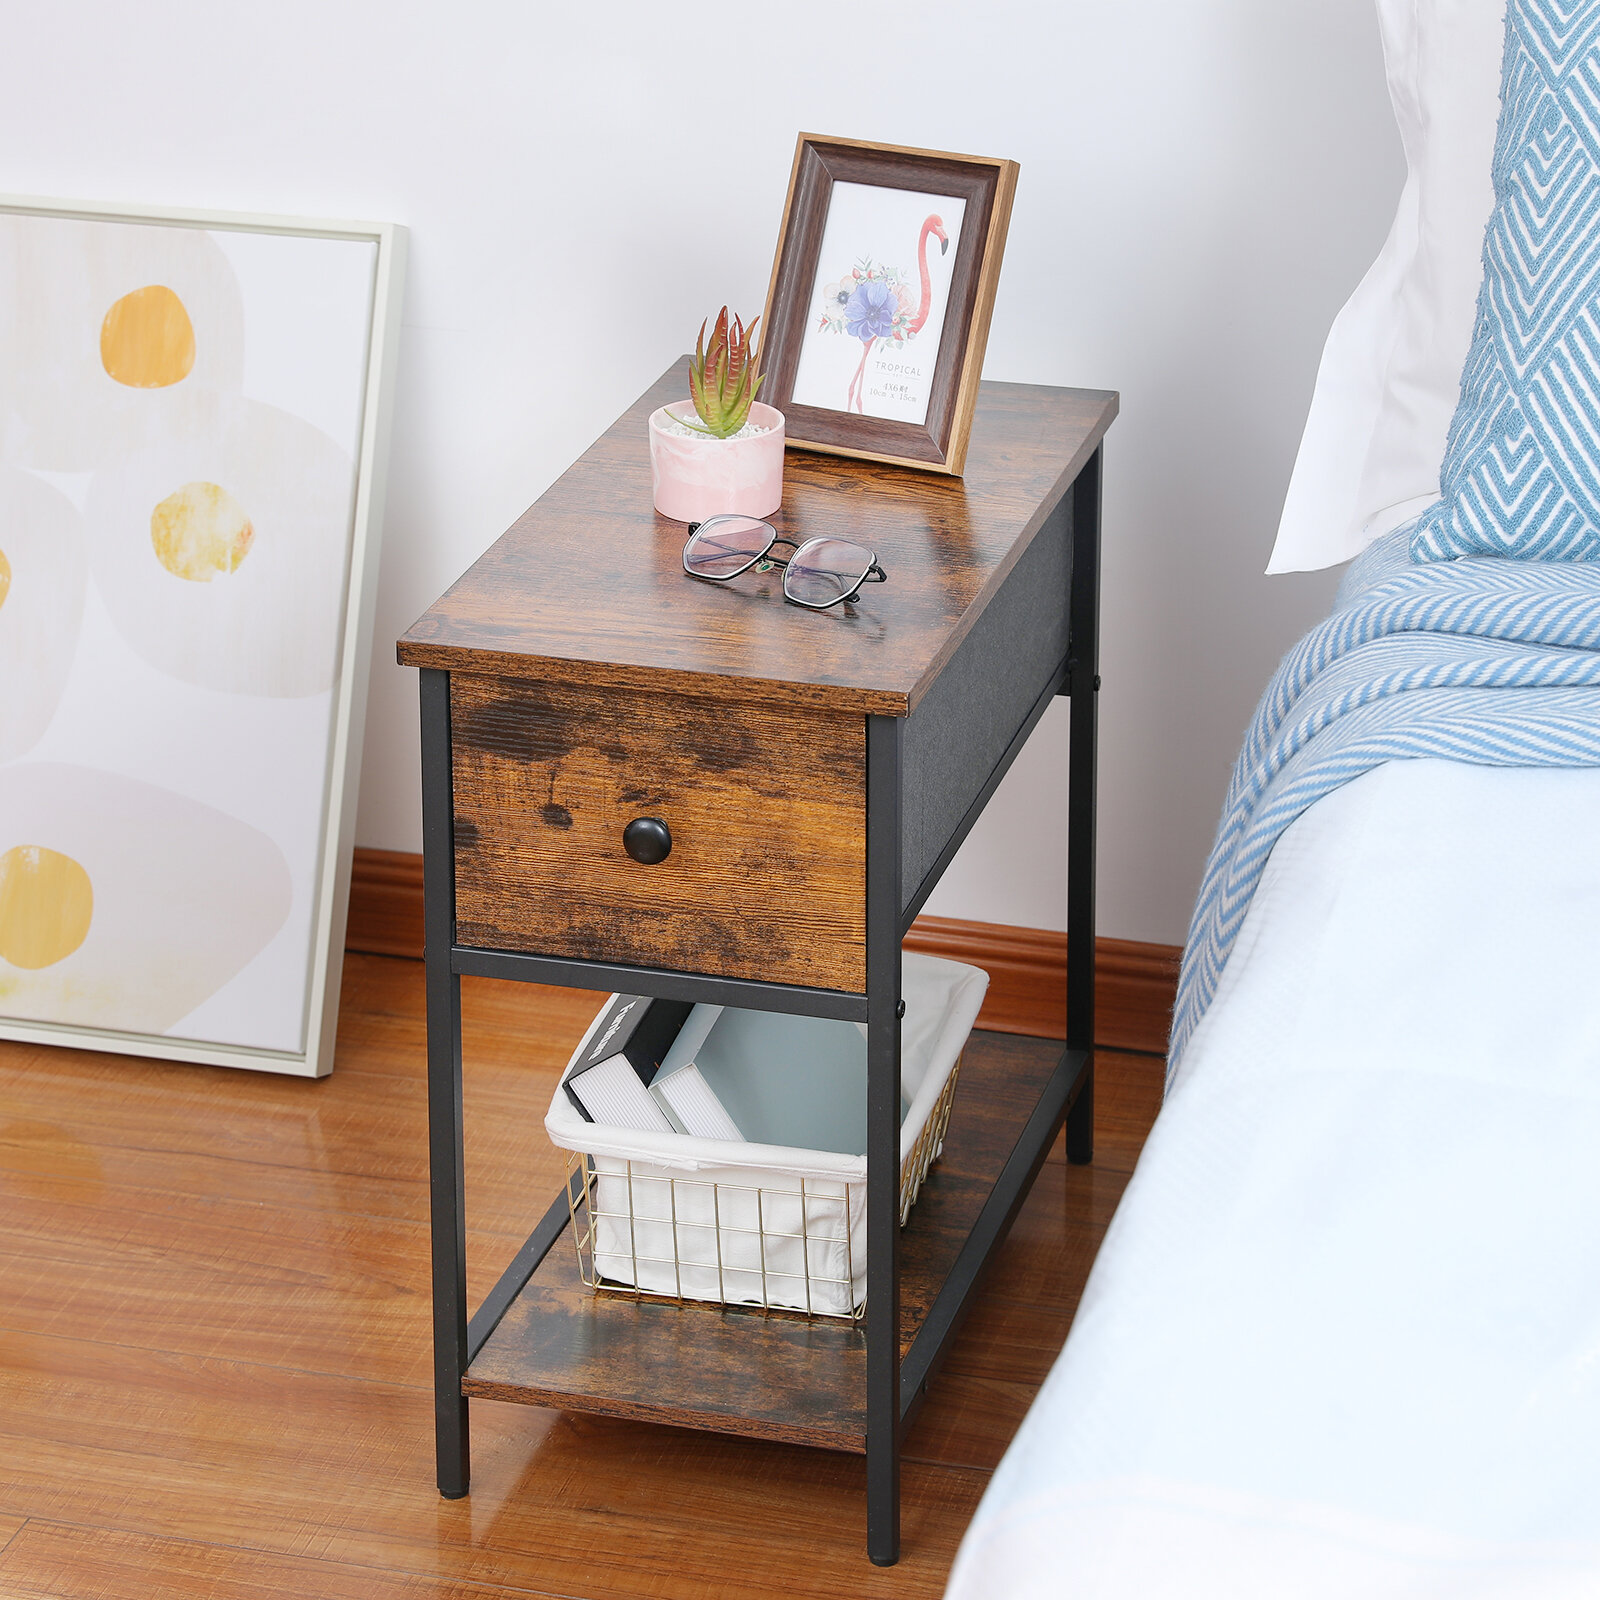 Details about   2 Tier Bedside Tables Storage Side Table Chest of Drawer Nightstand Storage Unit 